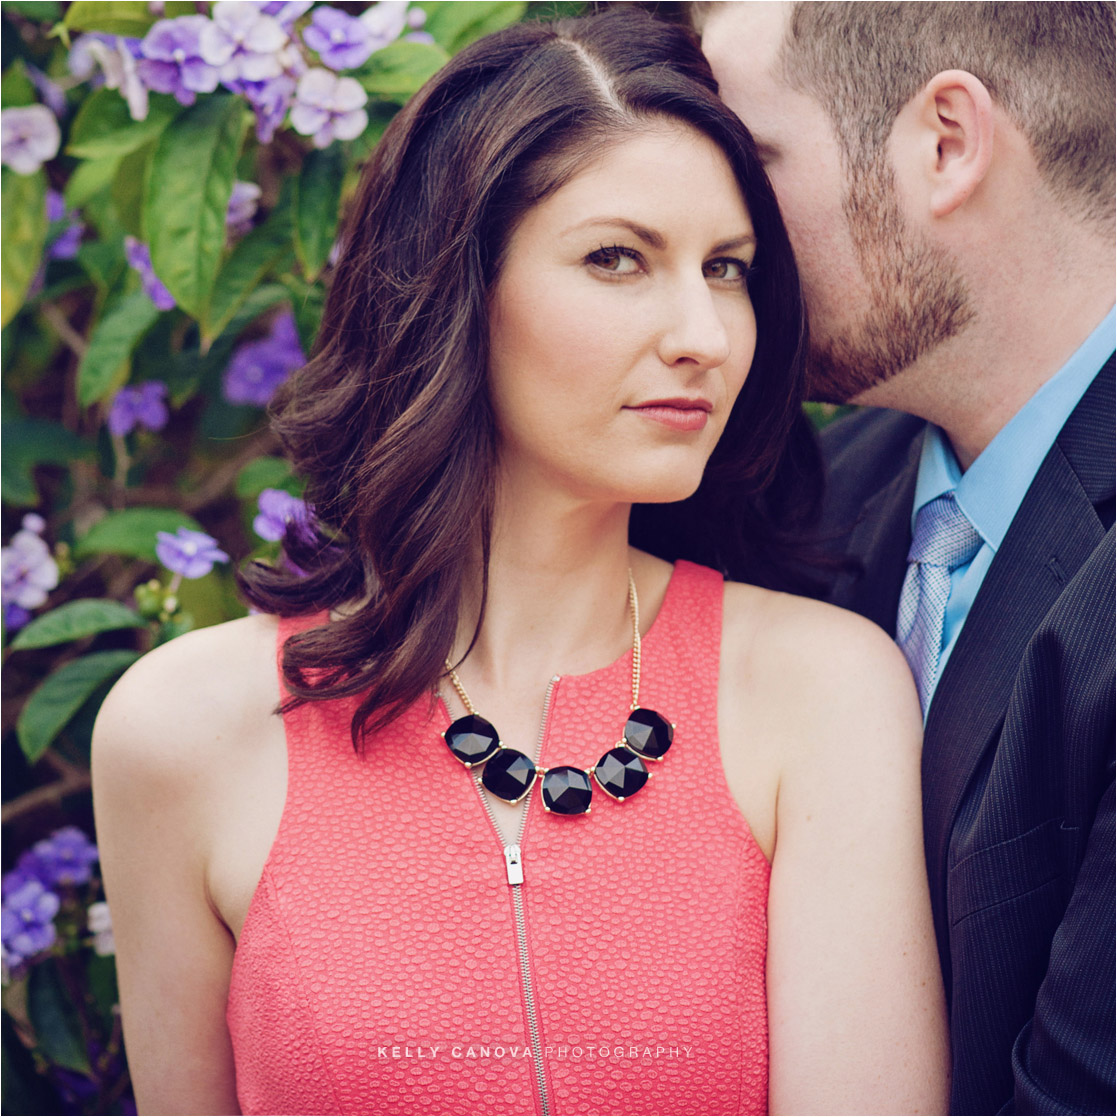 Engagement Photography in Orlando FL 